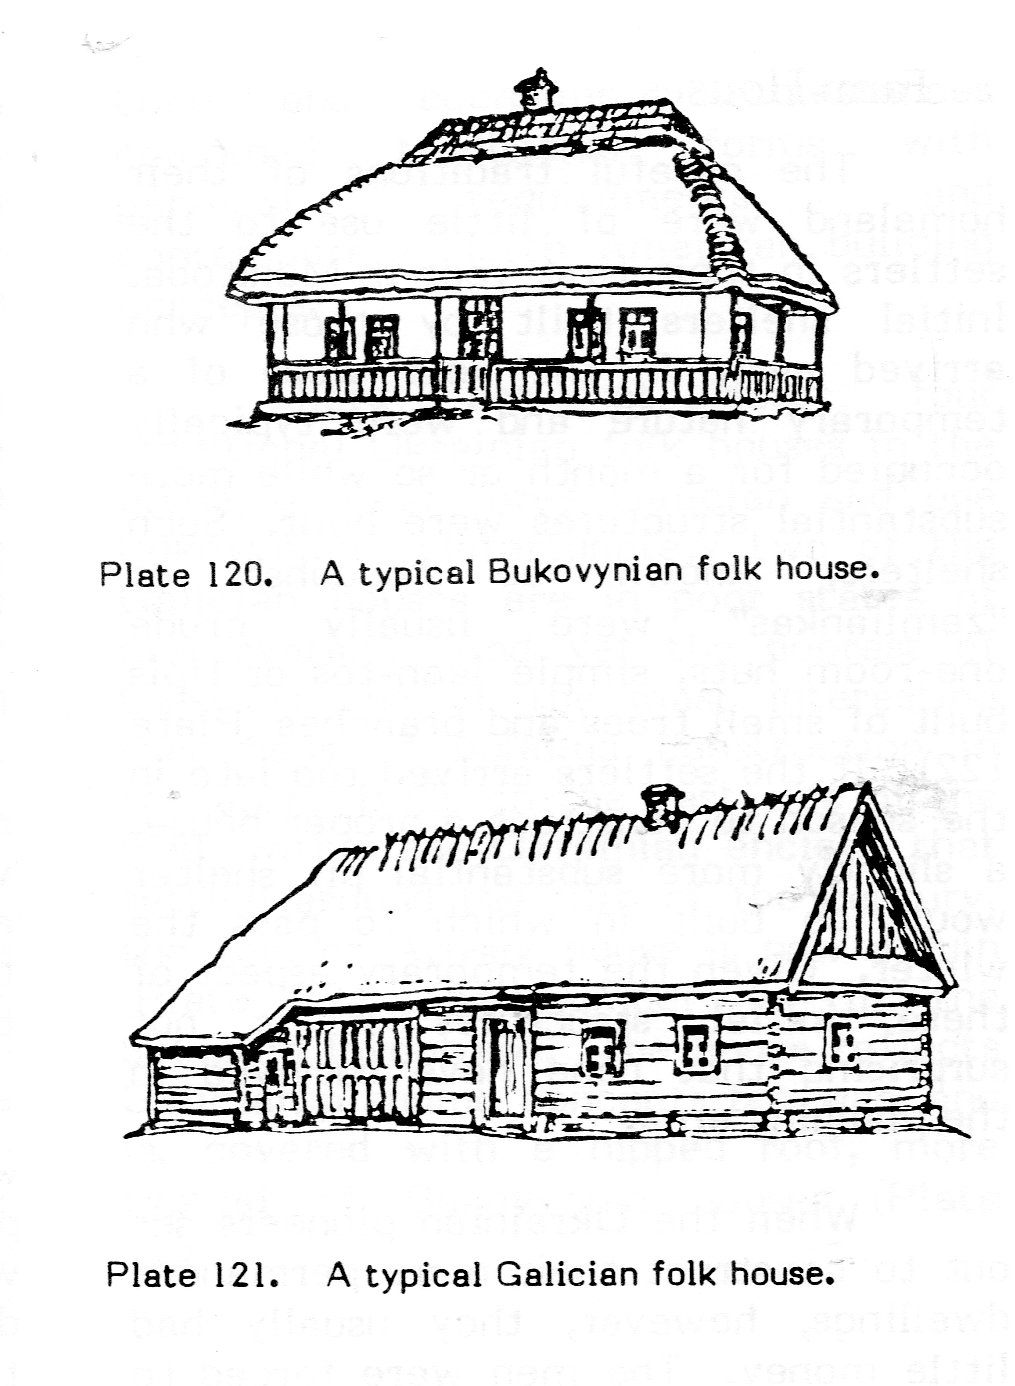 Bukovynian and Galician Style houses